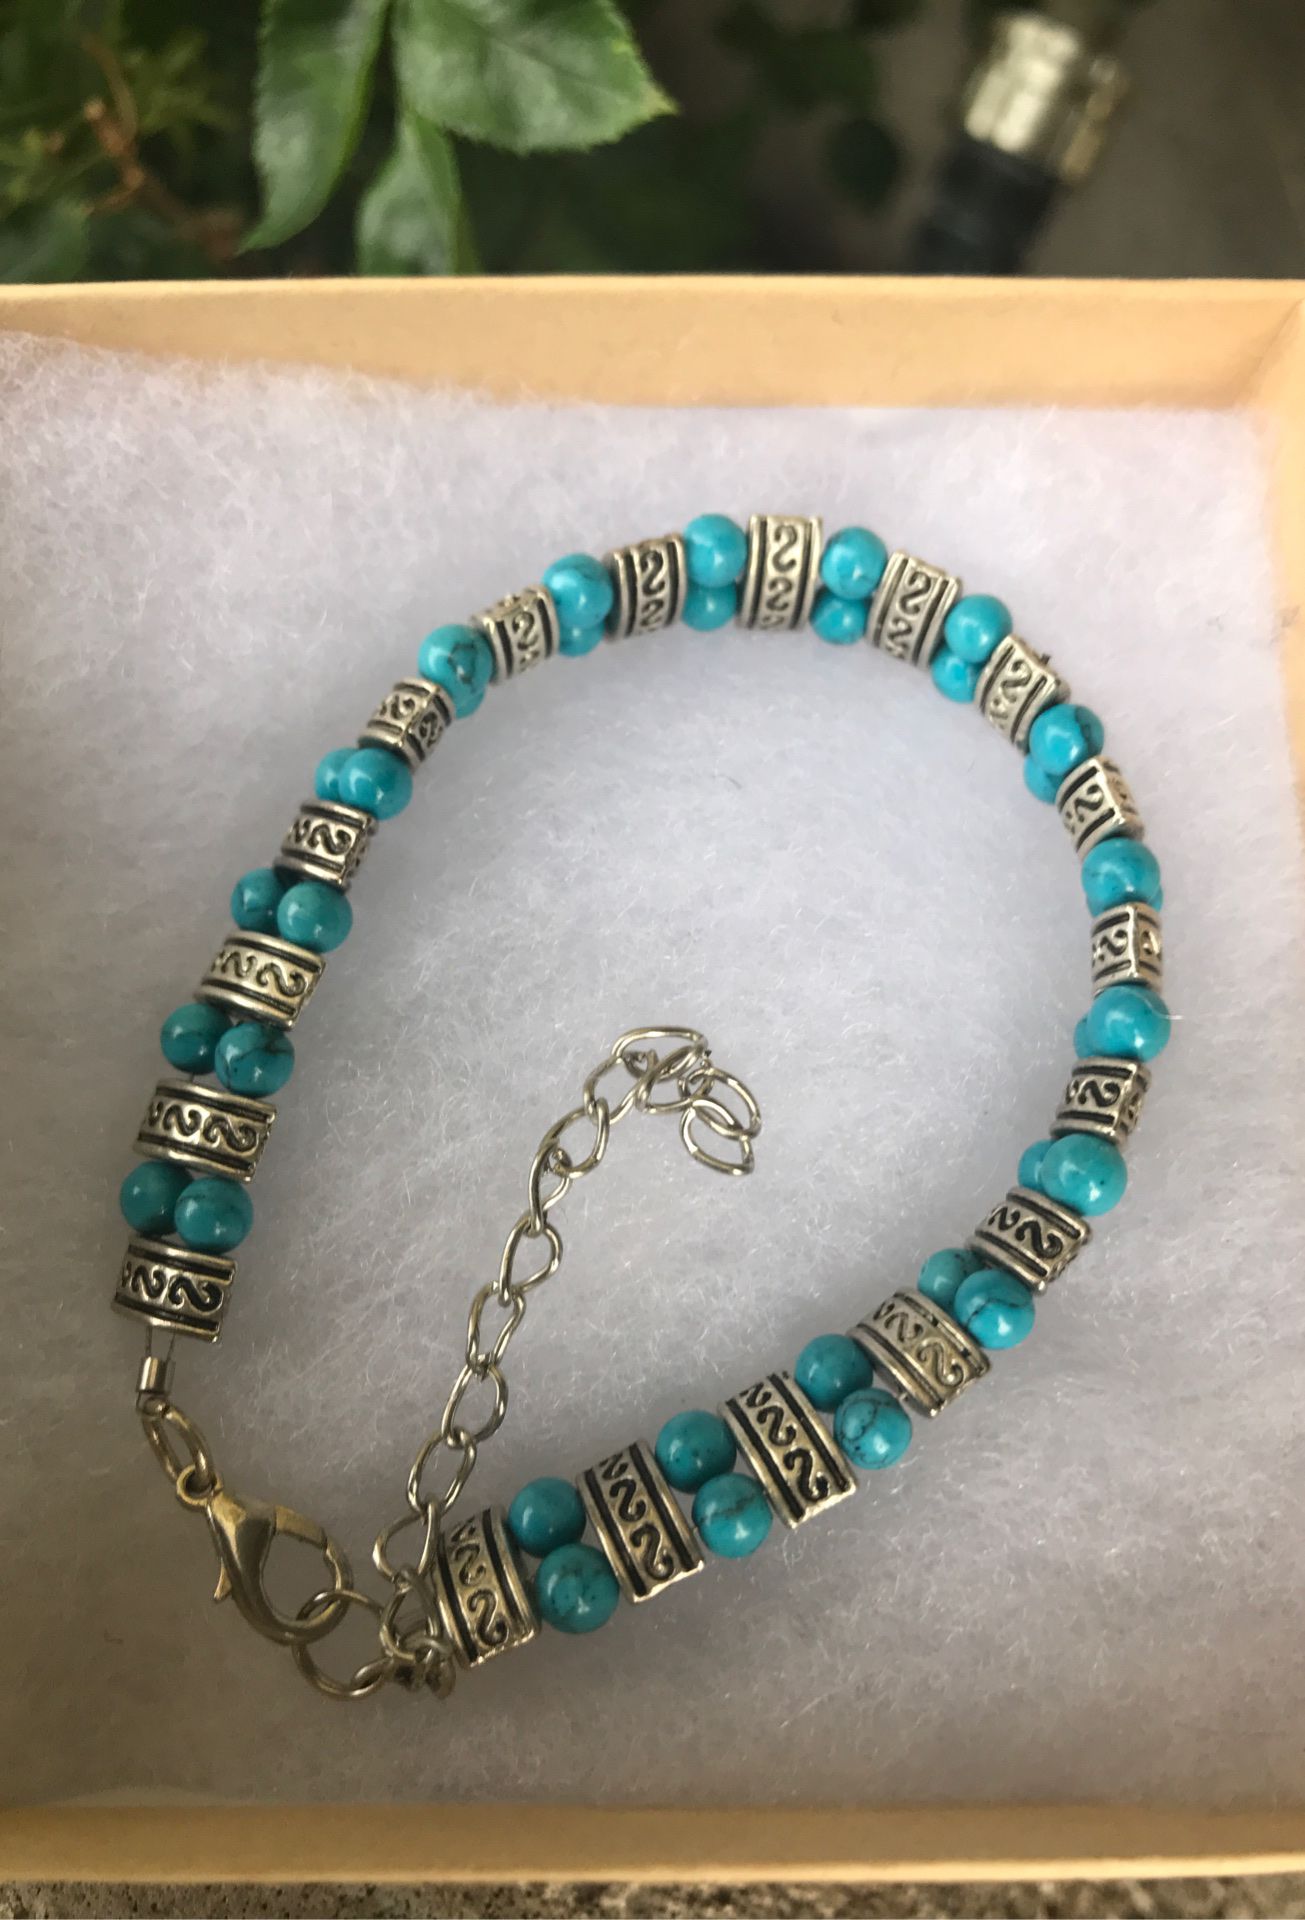 Turquoise with silver bracelet.